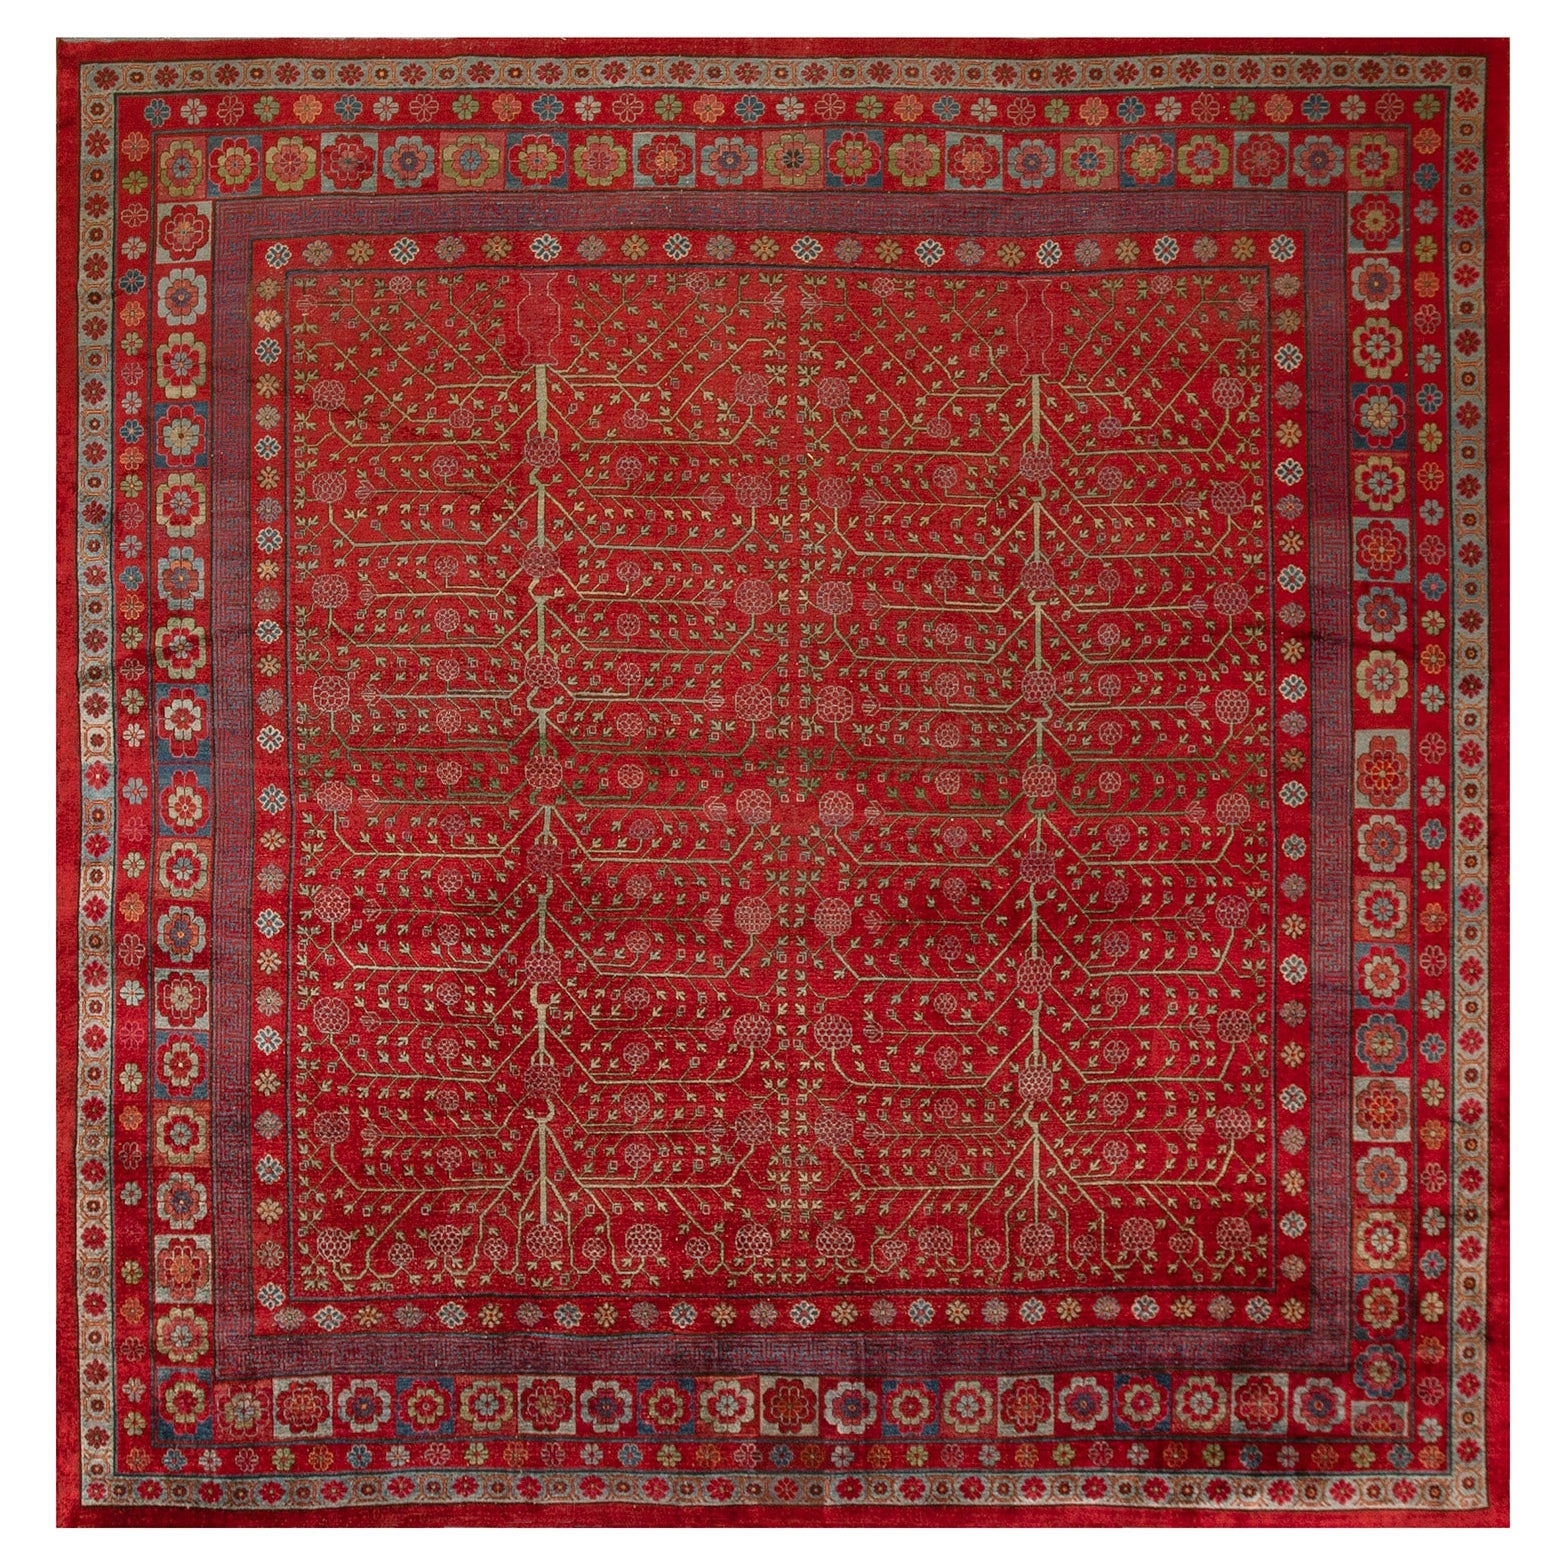 Early 19th Century Central Asian Chinese Khotan Silk Carpet For Sale